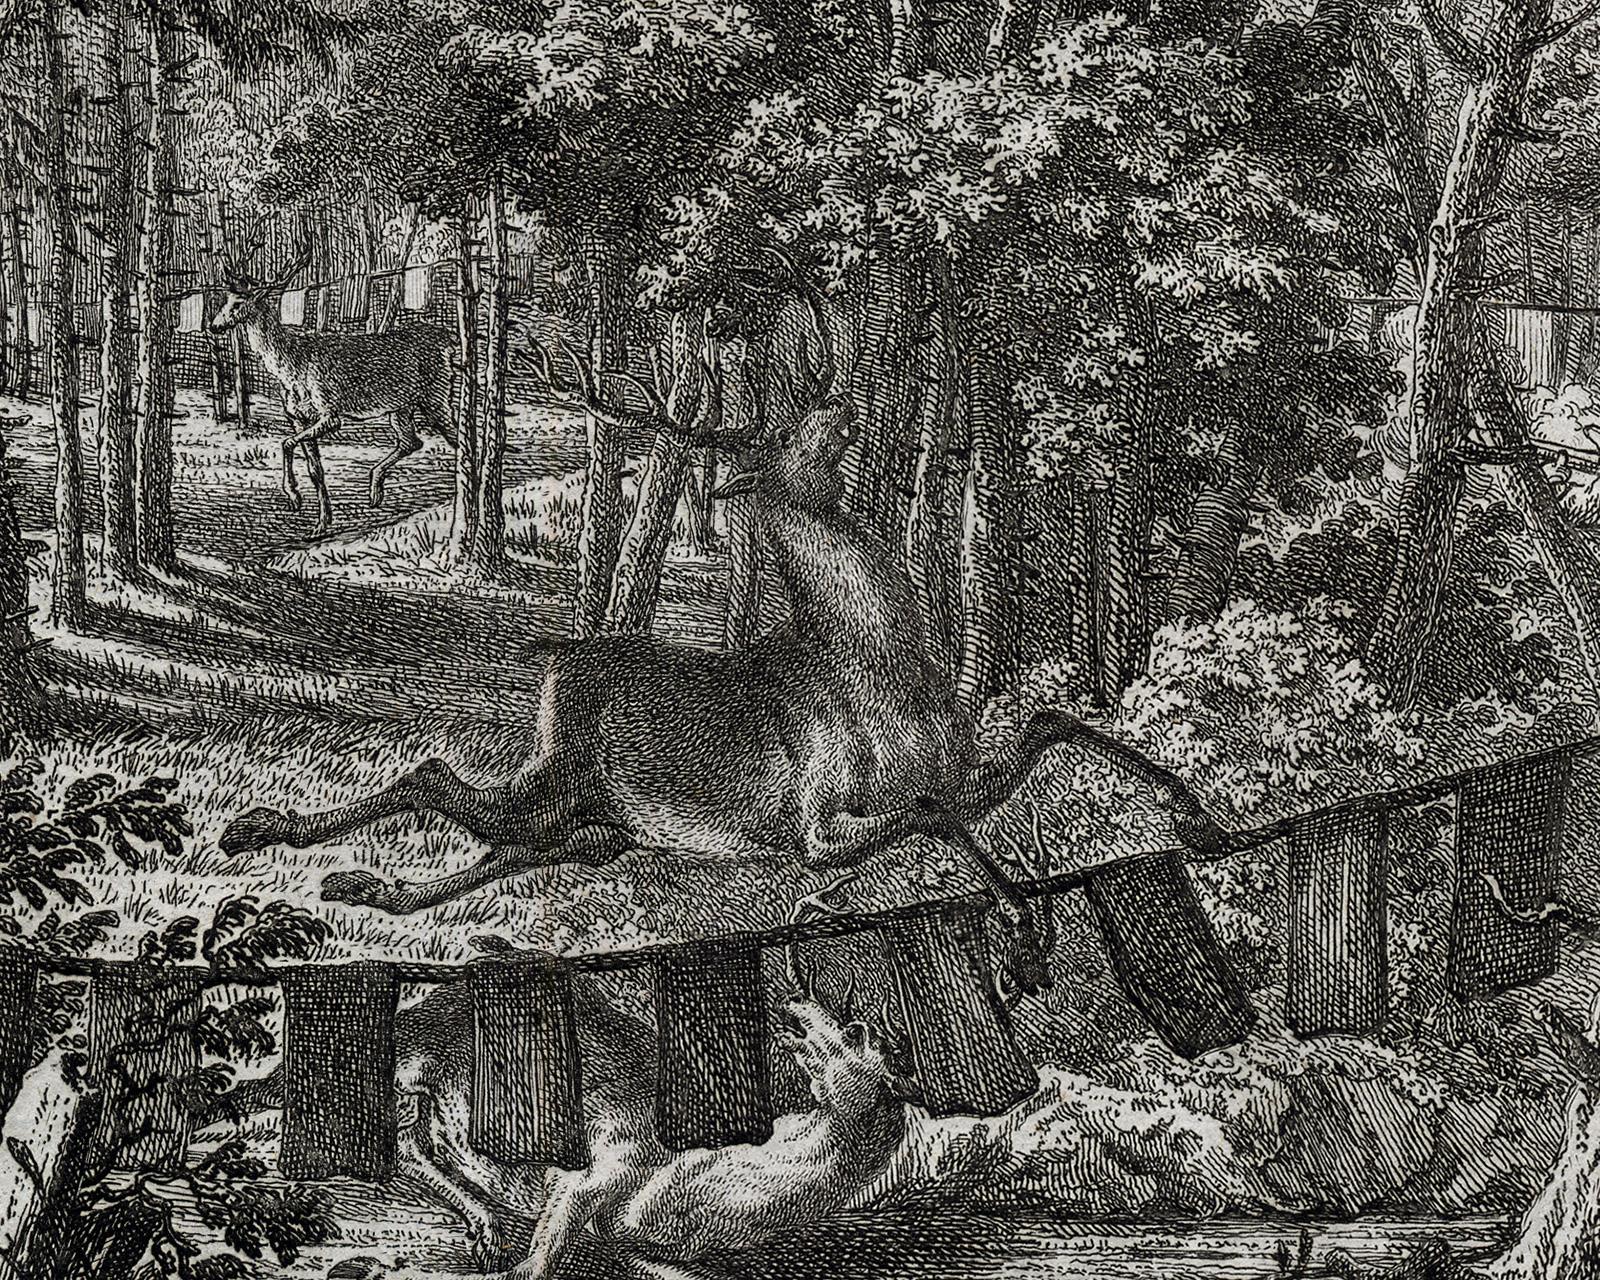 Subject: Antique print, titled: 'Das mit Flammen Schnuren umstelle Jagen.' - Hunting deer in an enclosed space. Ropes are used to section off a piece of forest, trapping the deer inside.

Description:  From: 'Virtute et Ingenio. Genaue und richtige